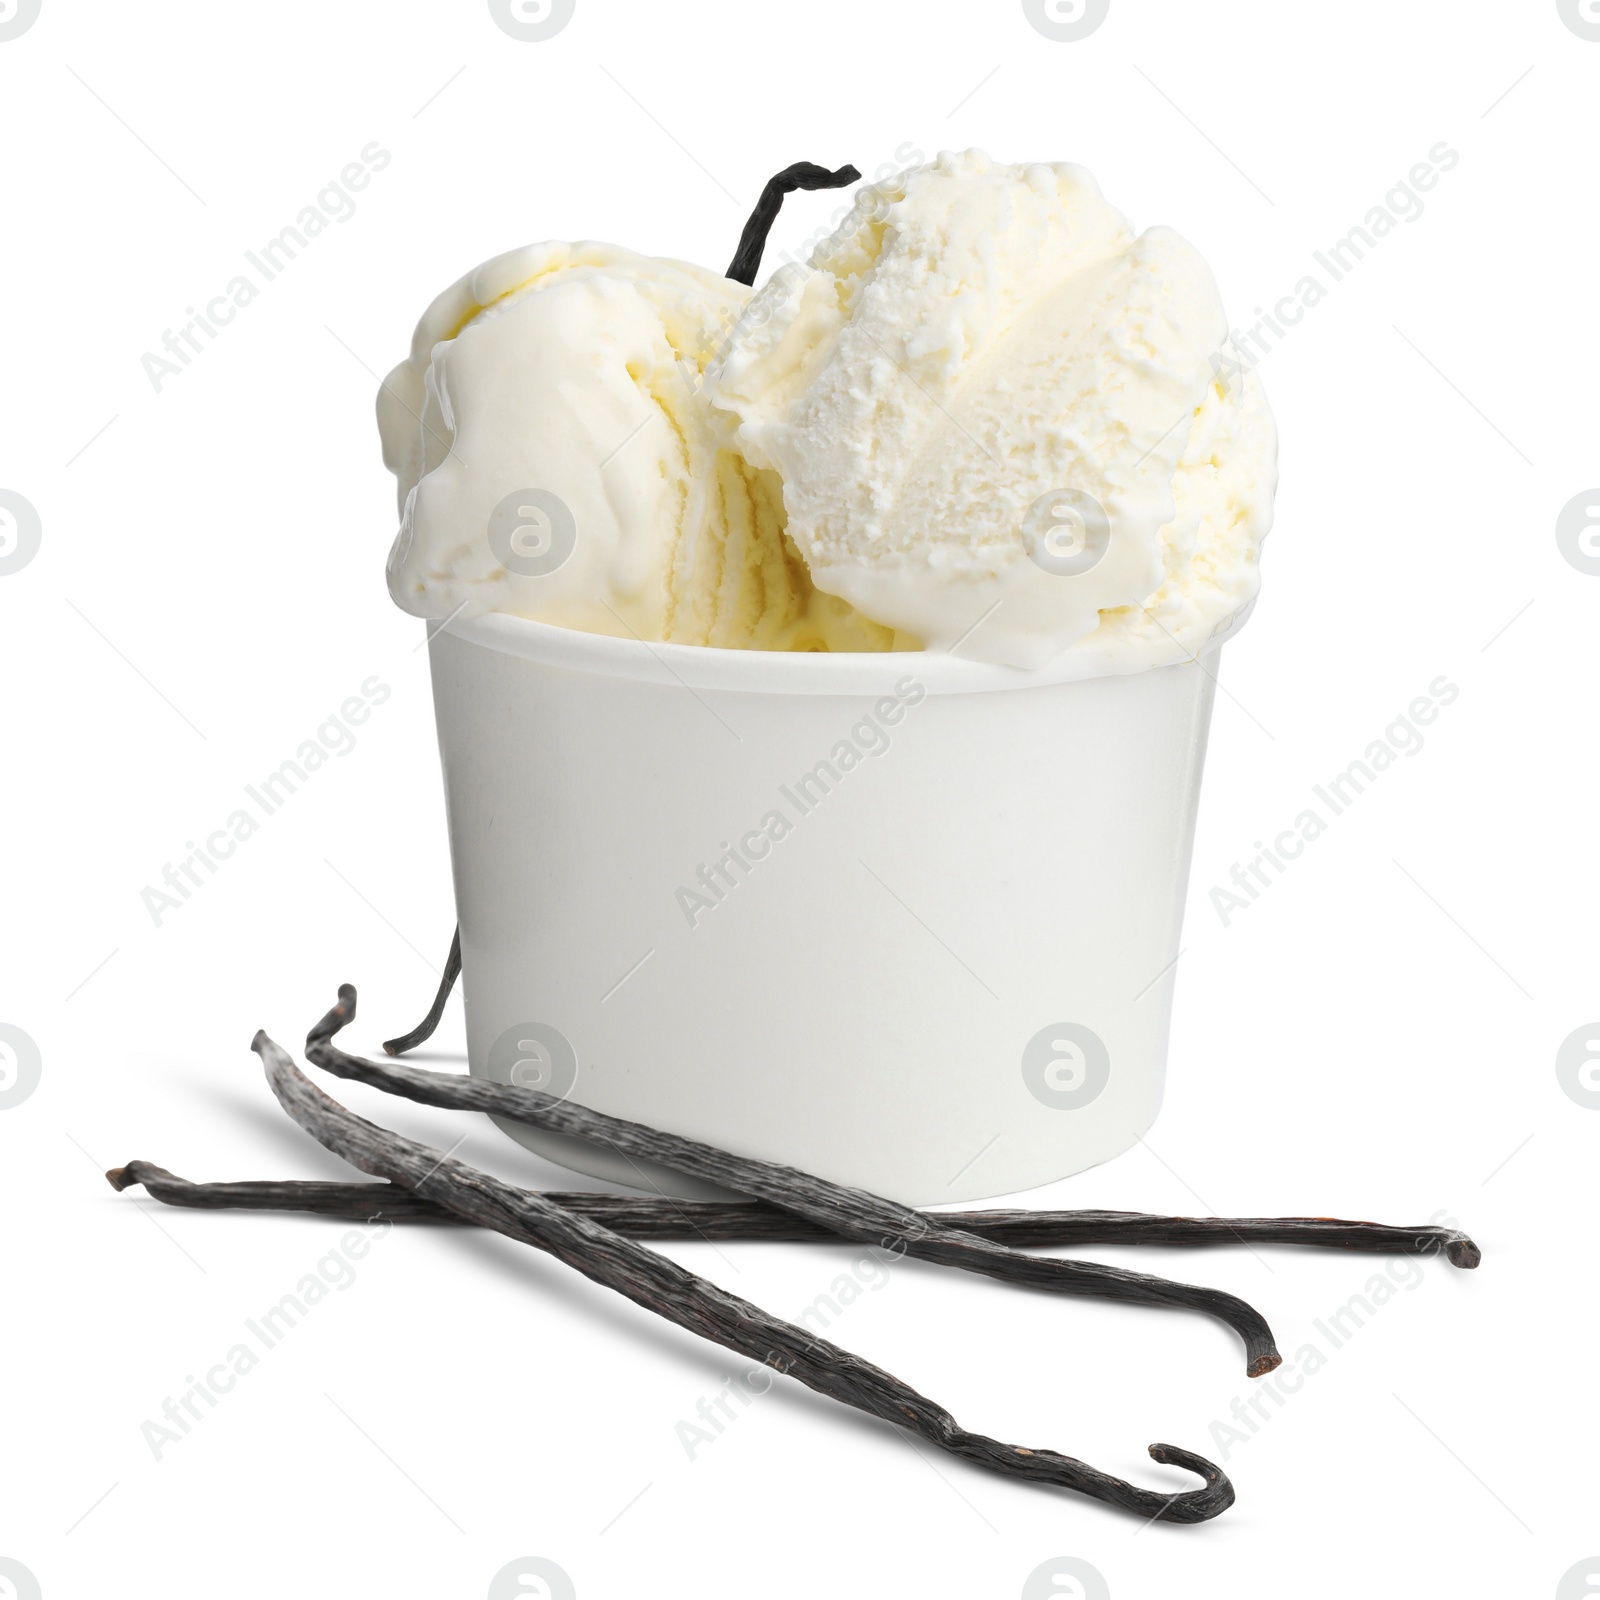 Image of Delicious vanilla ice cream in paper cup and vanilla pods isolated on white